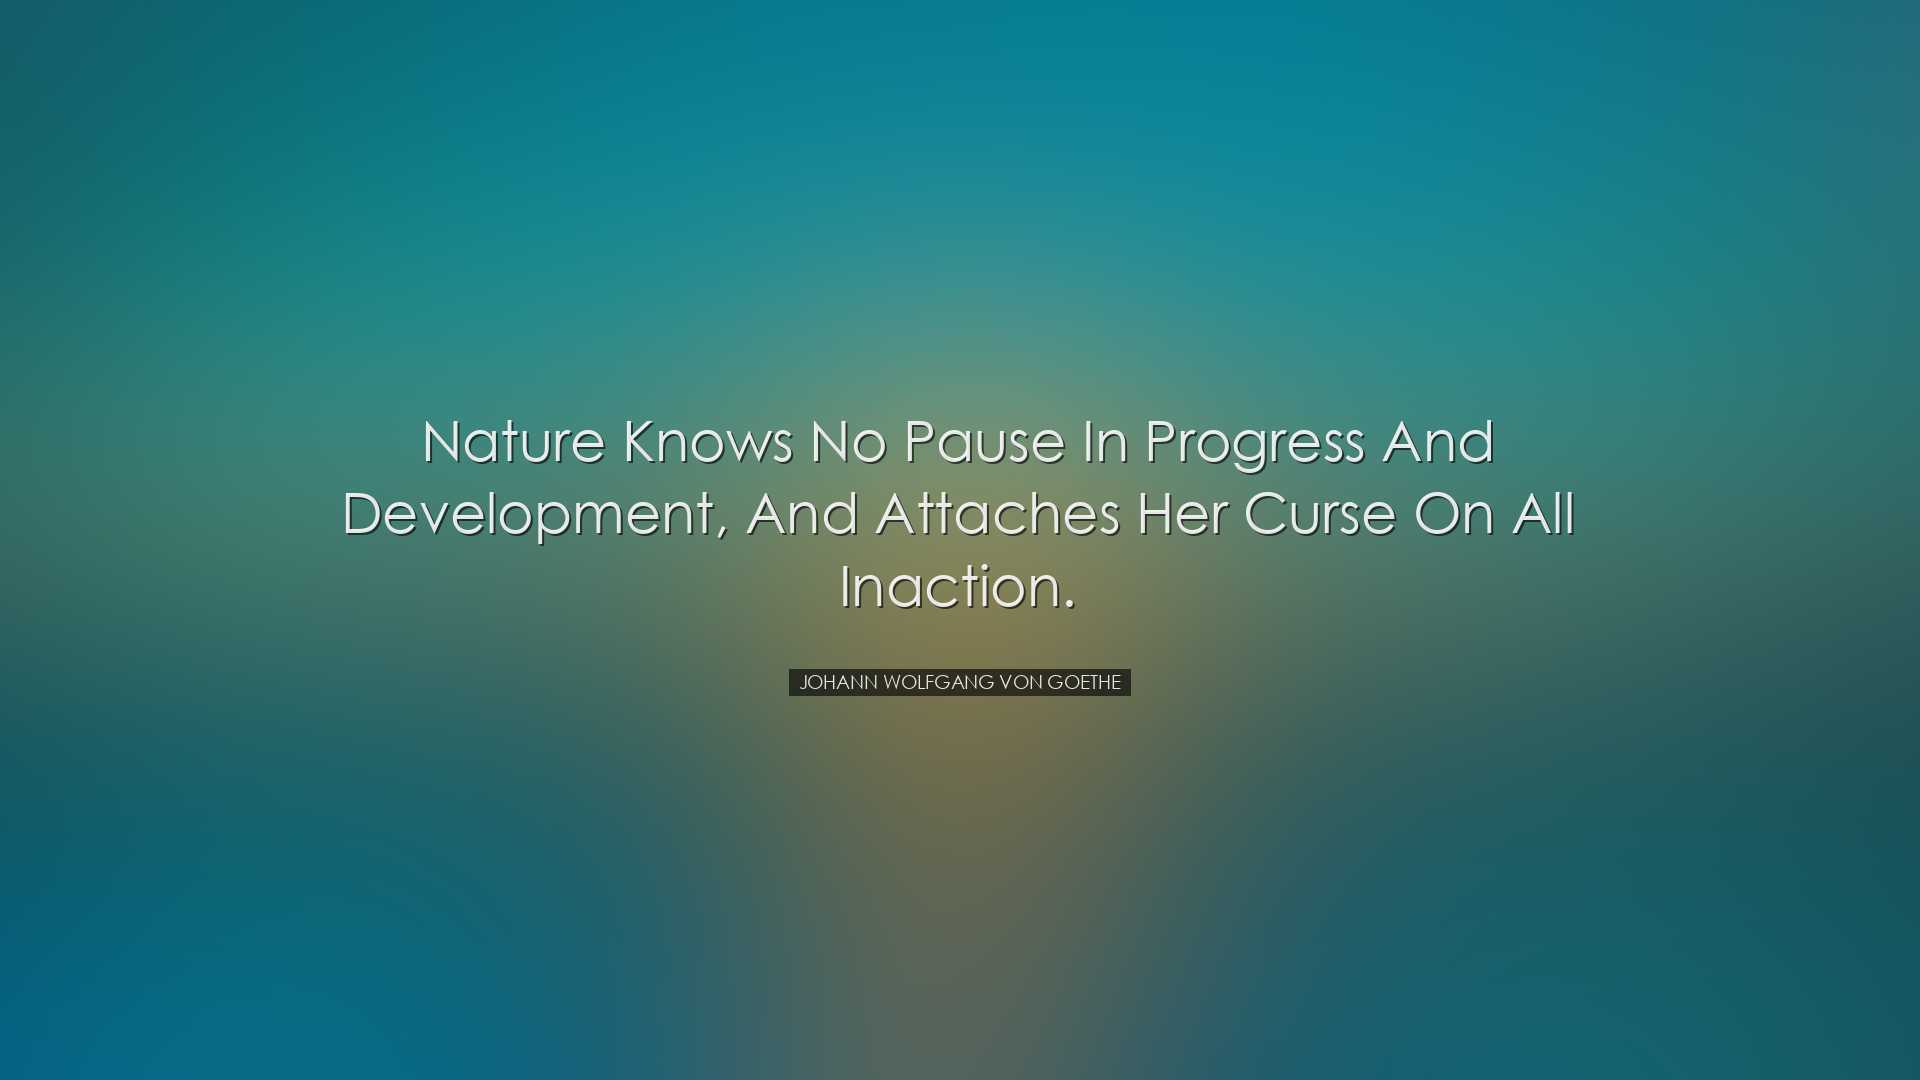 Nature knows no pause in progress and development, and attaches he